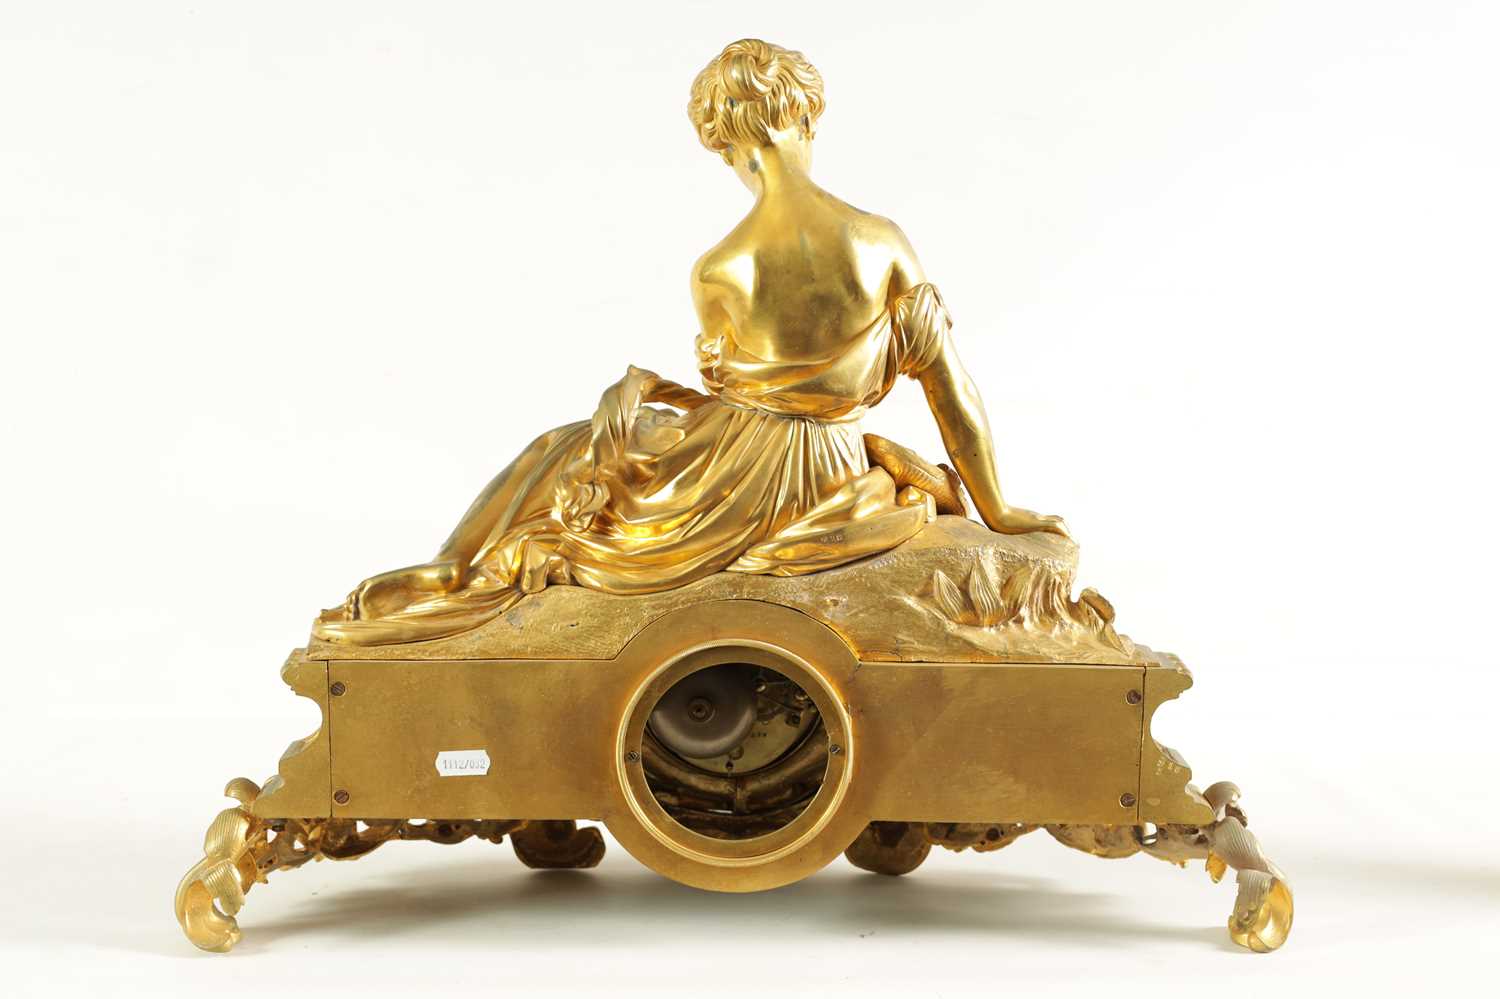 A LARGE 19TH CENTURY FRENCH FIGURAL ORMOLU MANTEL CLOCK - Image 8 of 11